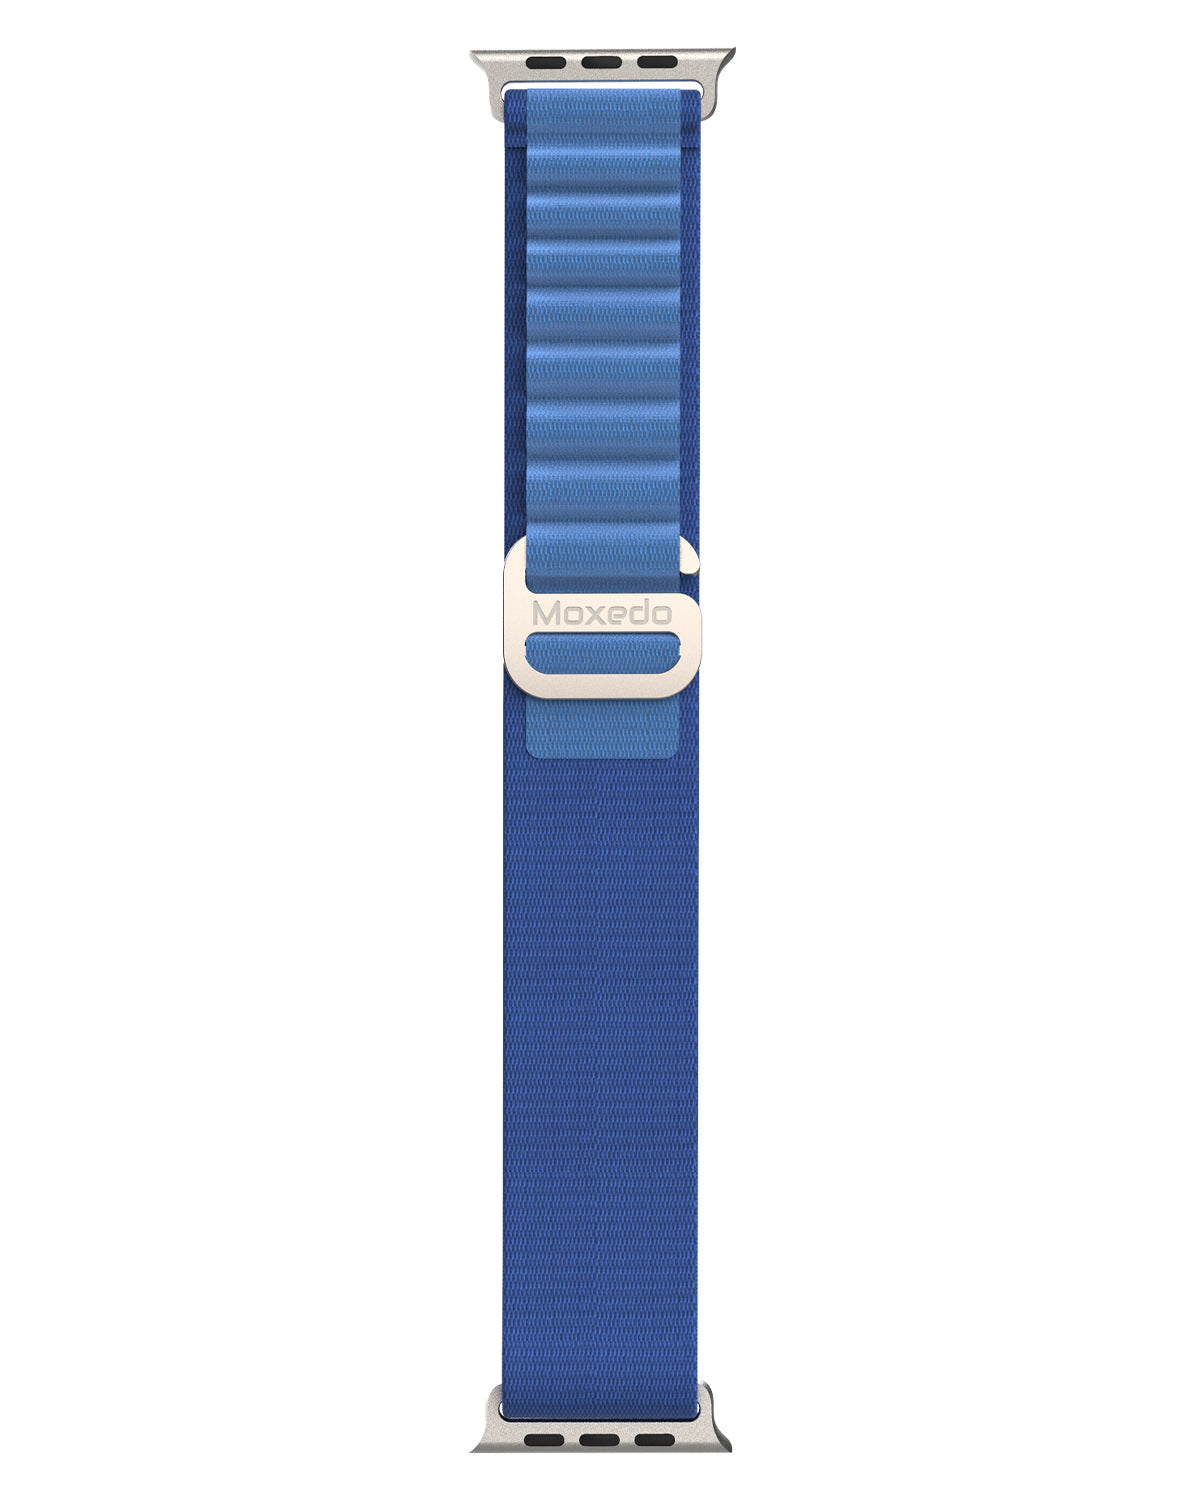 Moxedo Alpine Loop Watch Band Adjustable Sports Nylon Woven with Titanium G-Hook Strap design for 44mm,45mm,49mm (Mist Blue)